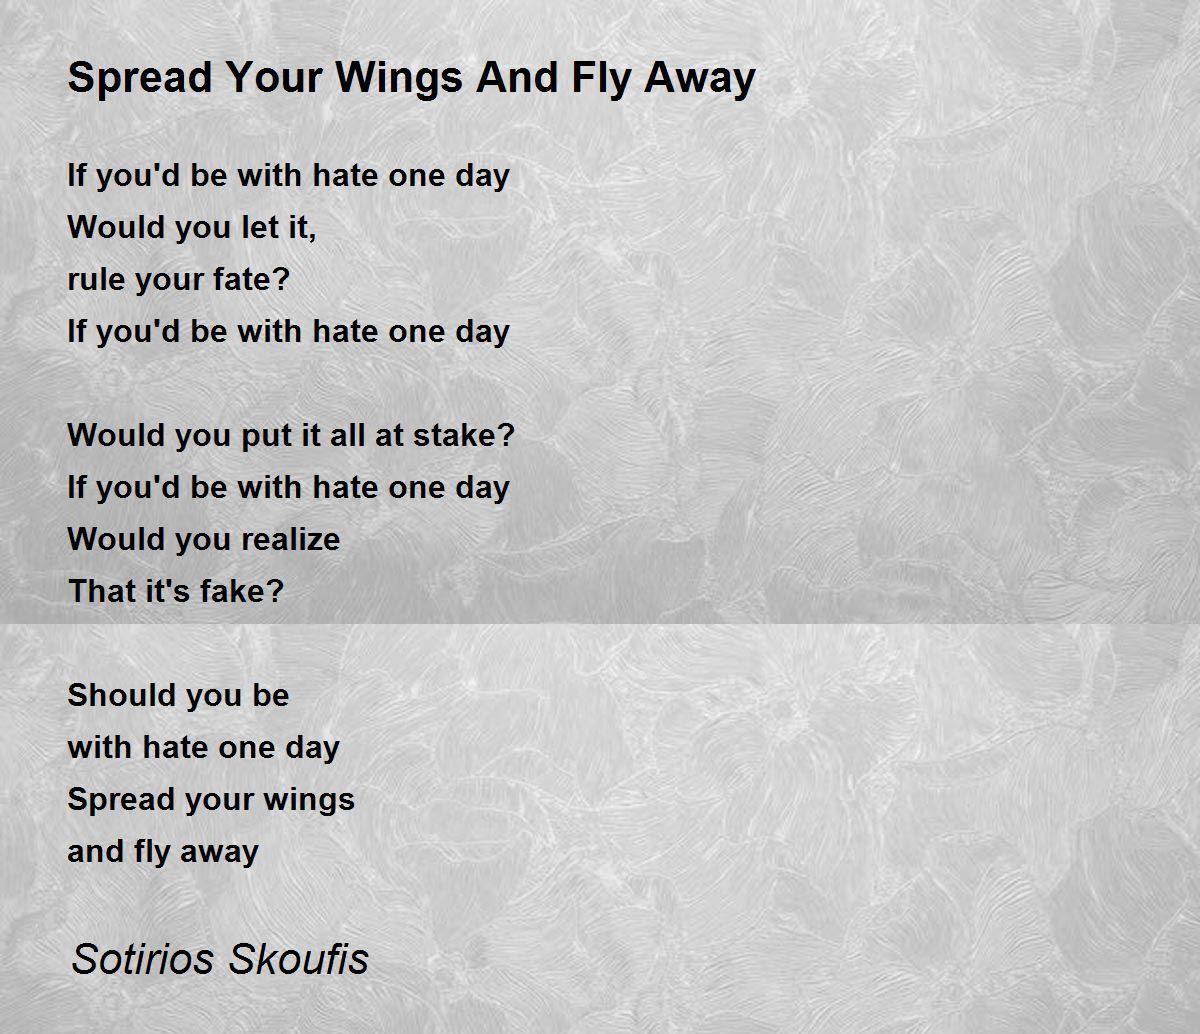 Spread My Wings And Fly Away